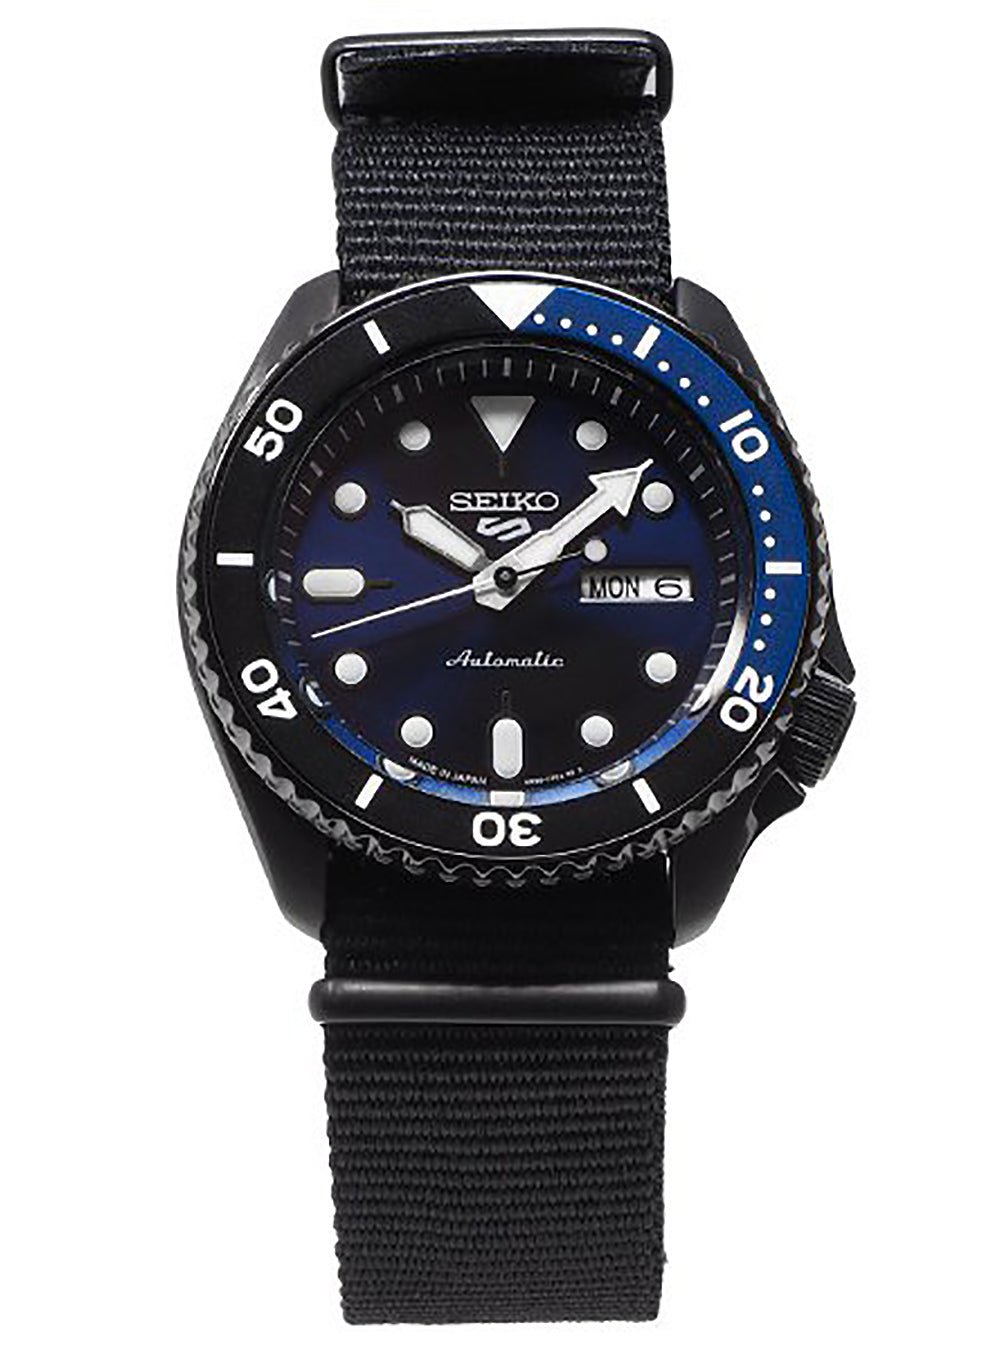 SEIKO 5 SPORTS SBSA099 ONLINE SHOP LIMITED MADE IN JAPAN